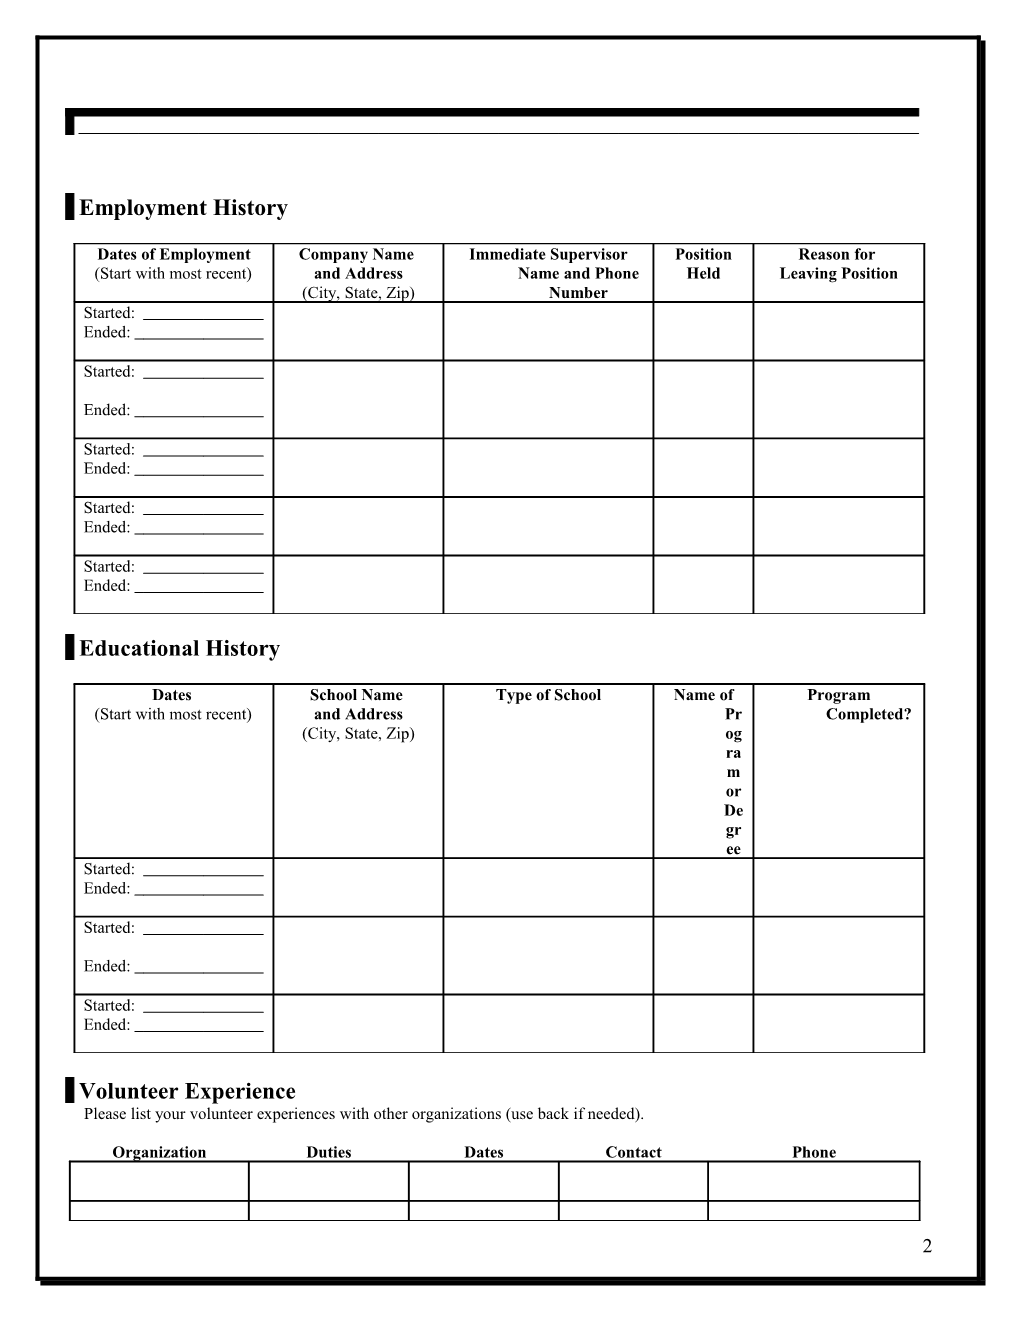 Application for Employees and Volunteers